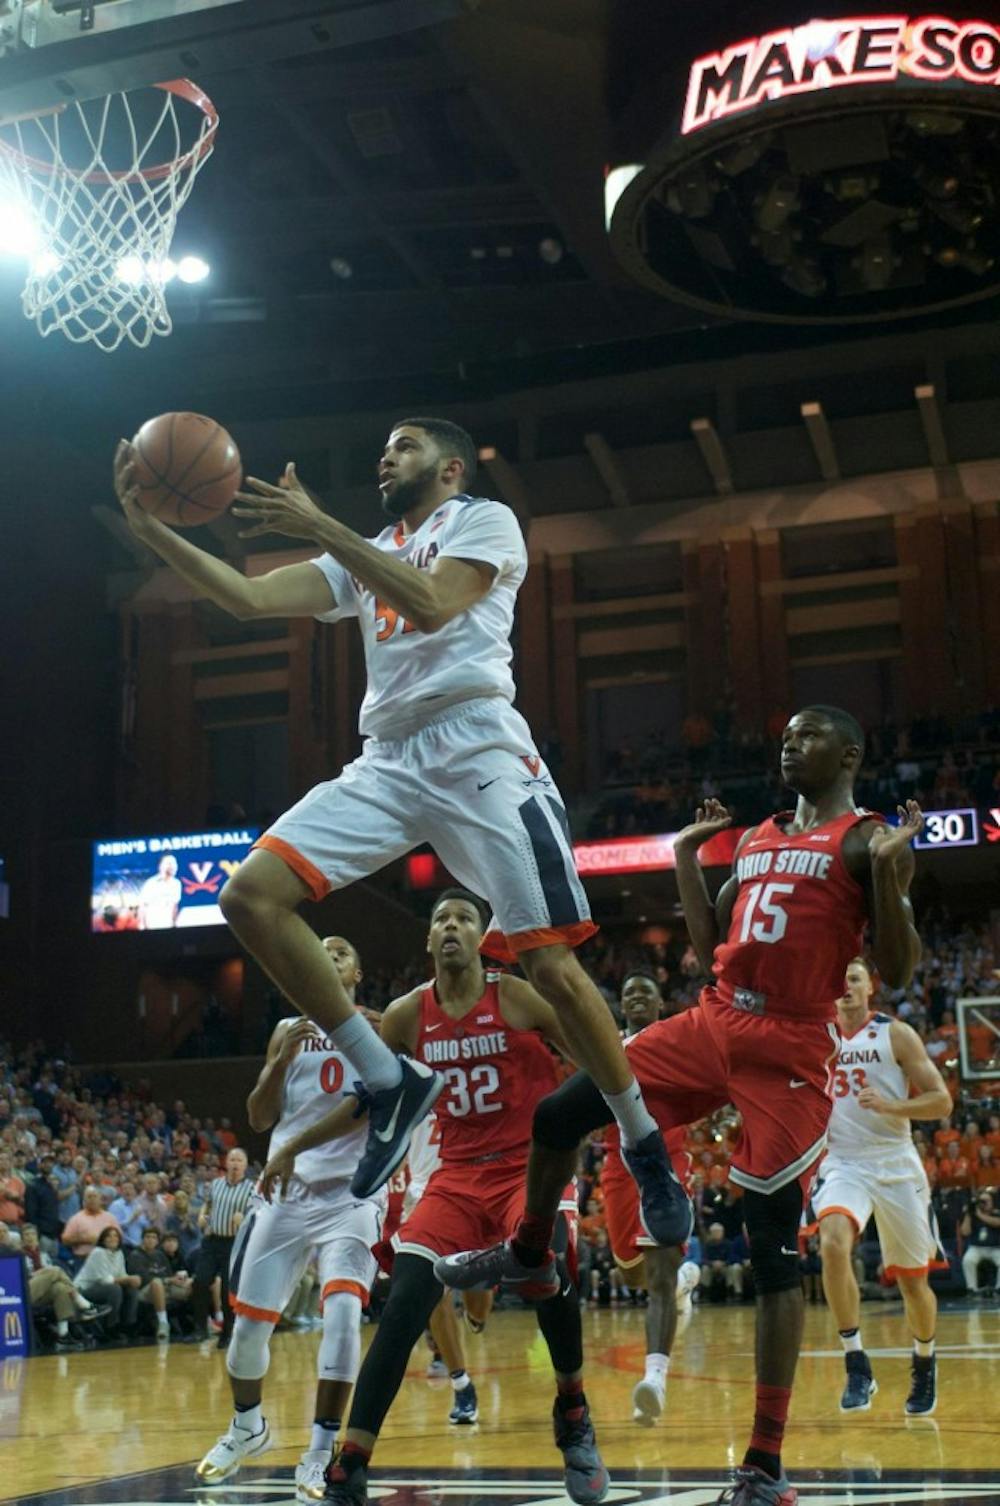 <p>Junior guard Darius Thompson has been one of Virginia basketball's more consistent scorers this season. The Murfreesboro, Tenn. native averages 9.8 points per game, but there's concern that his production might drop off in ACC play.&nbsp;</p>